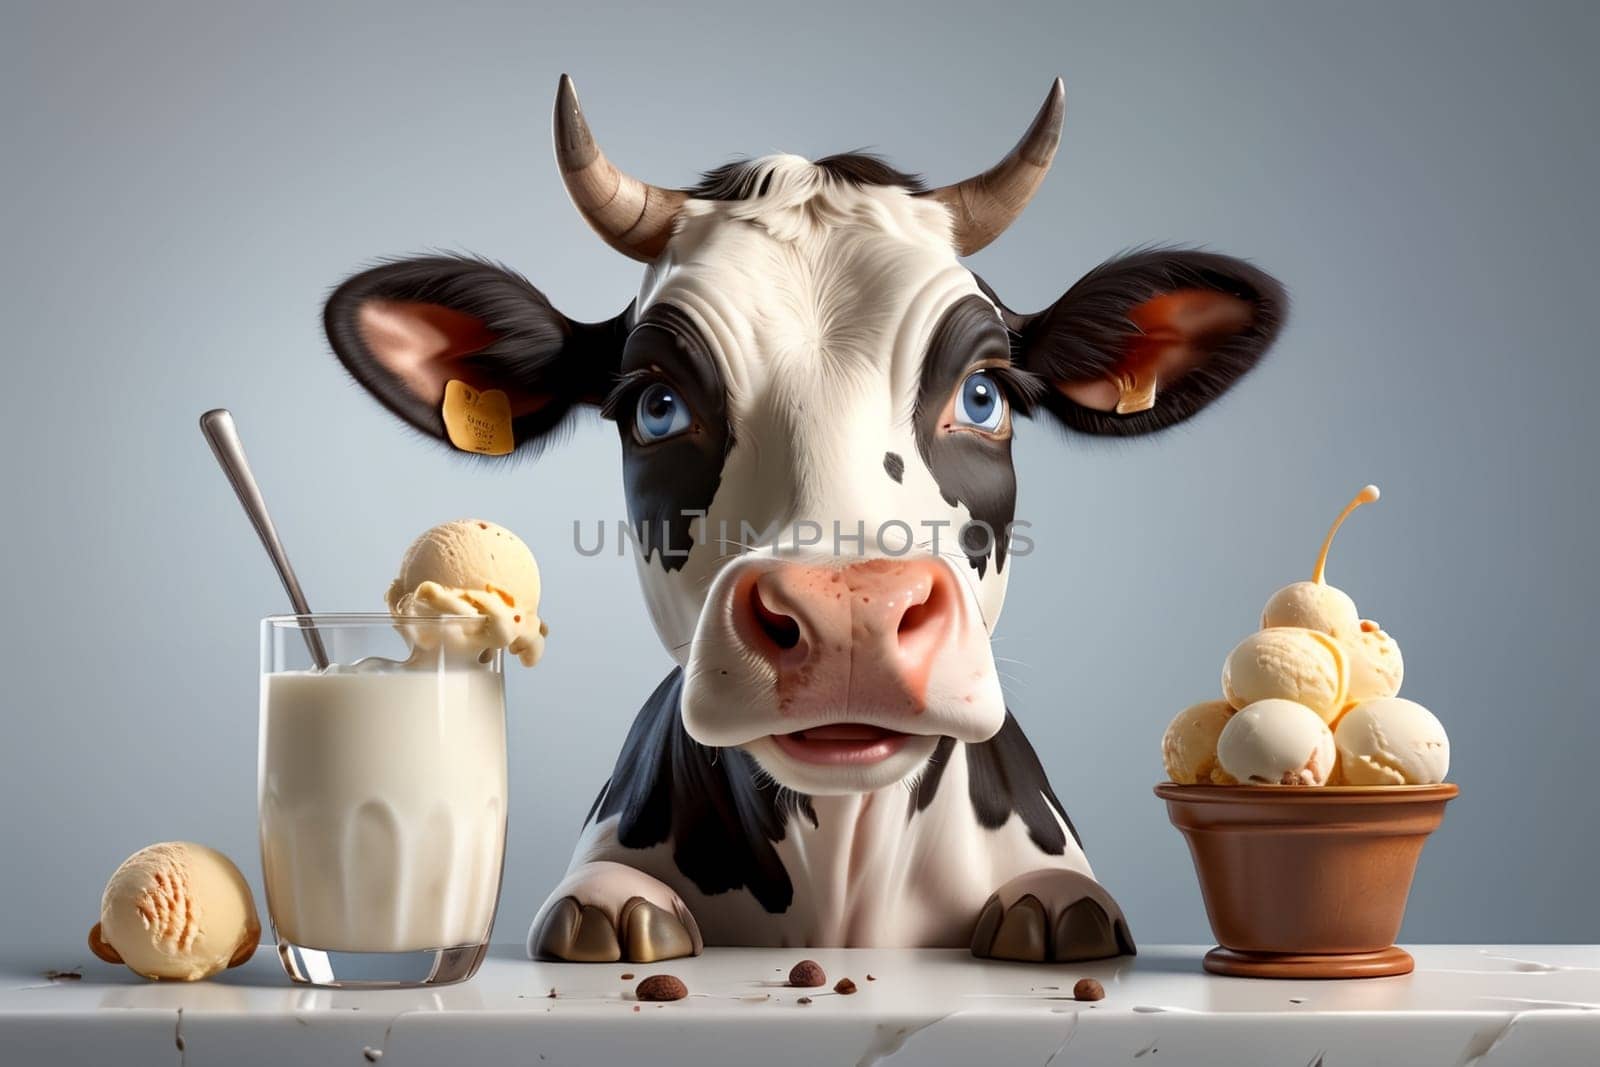 cute cow looking at milk ice cream in a glass .